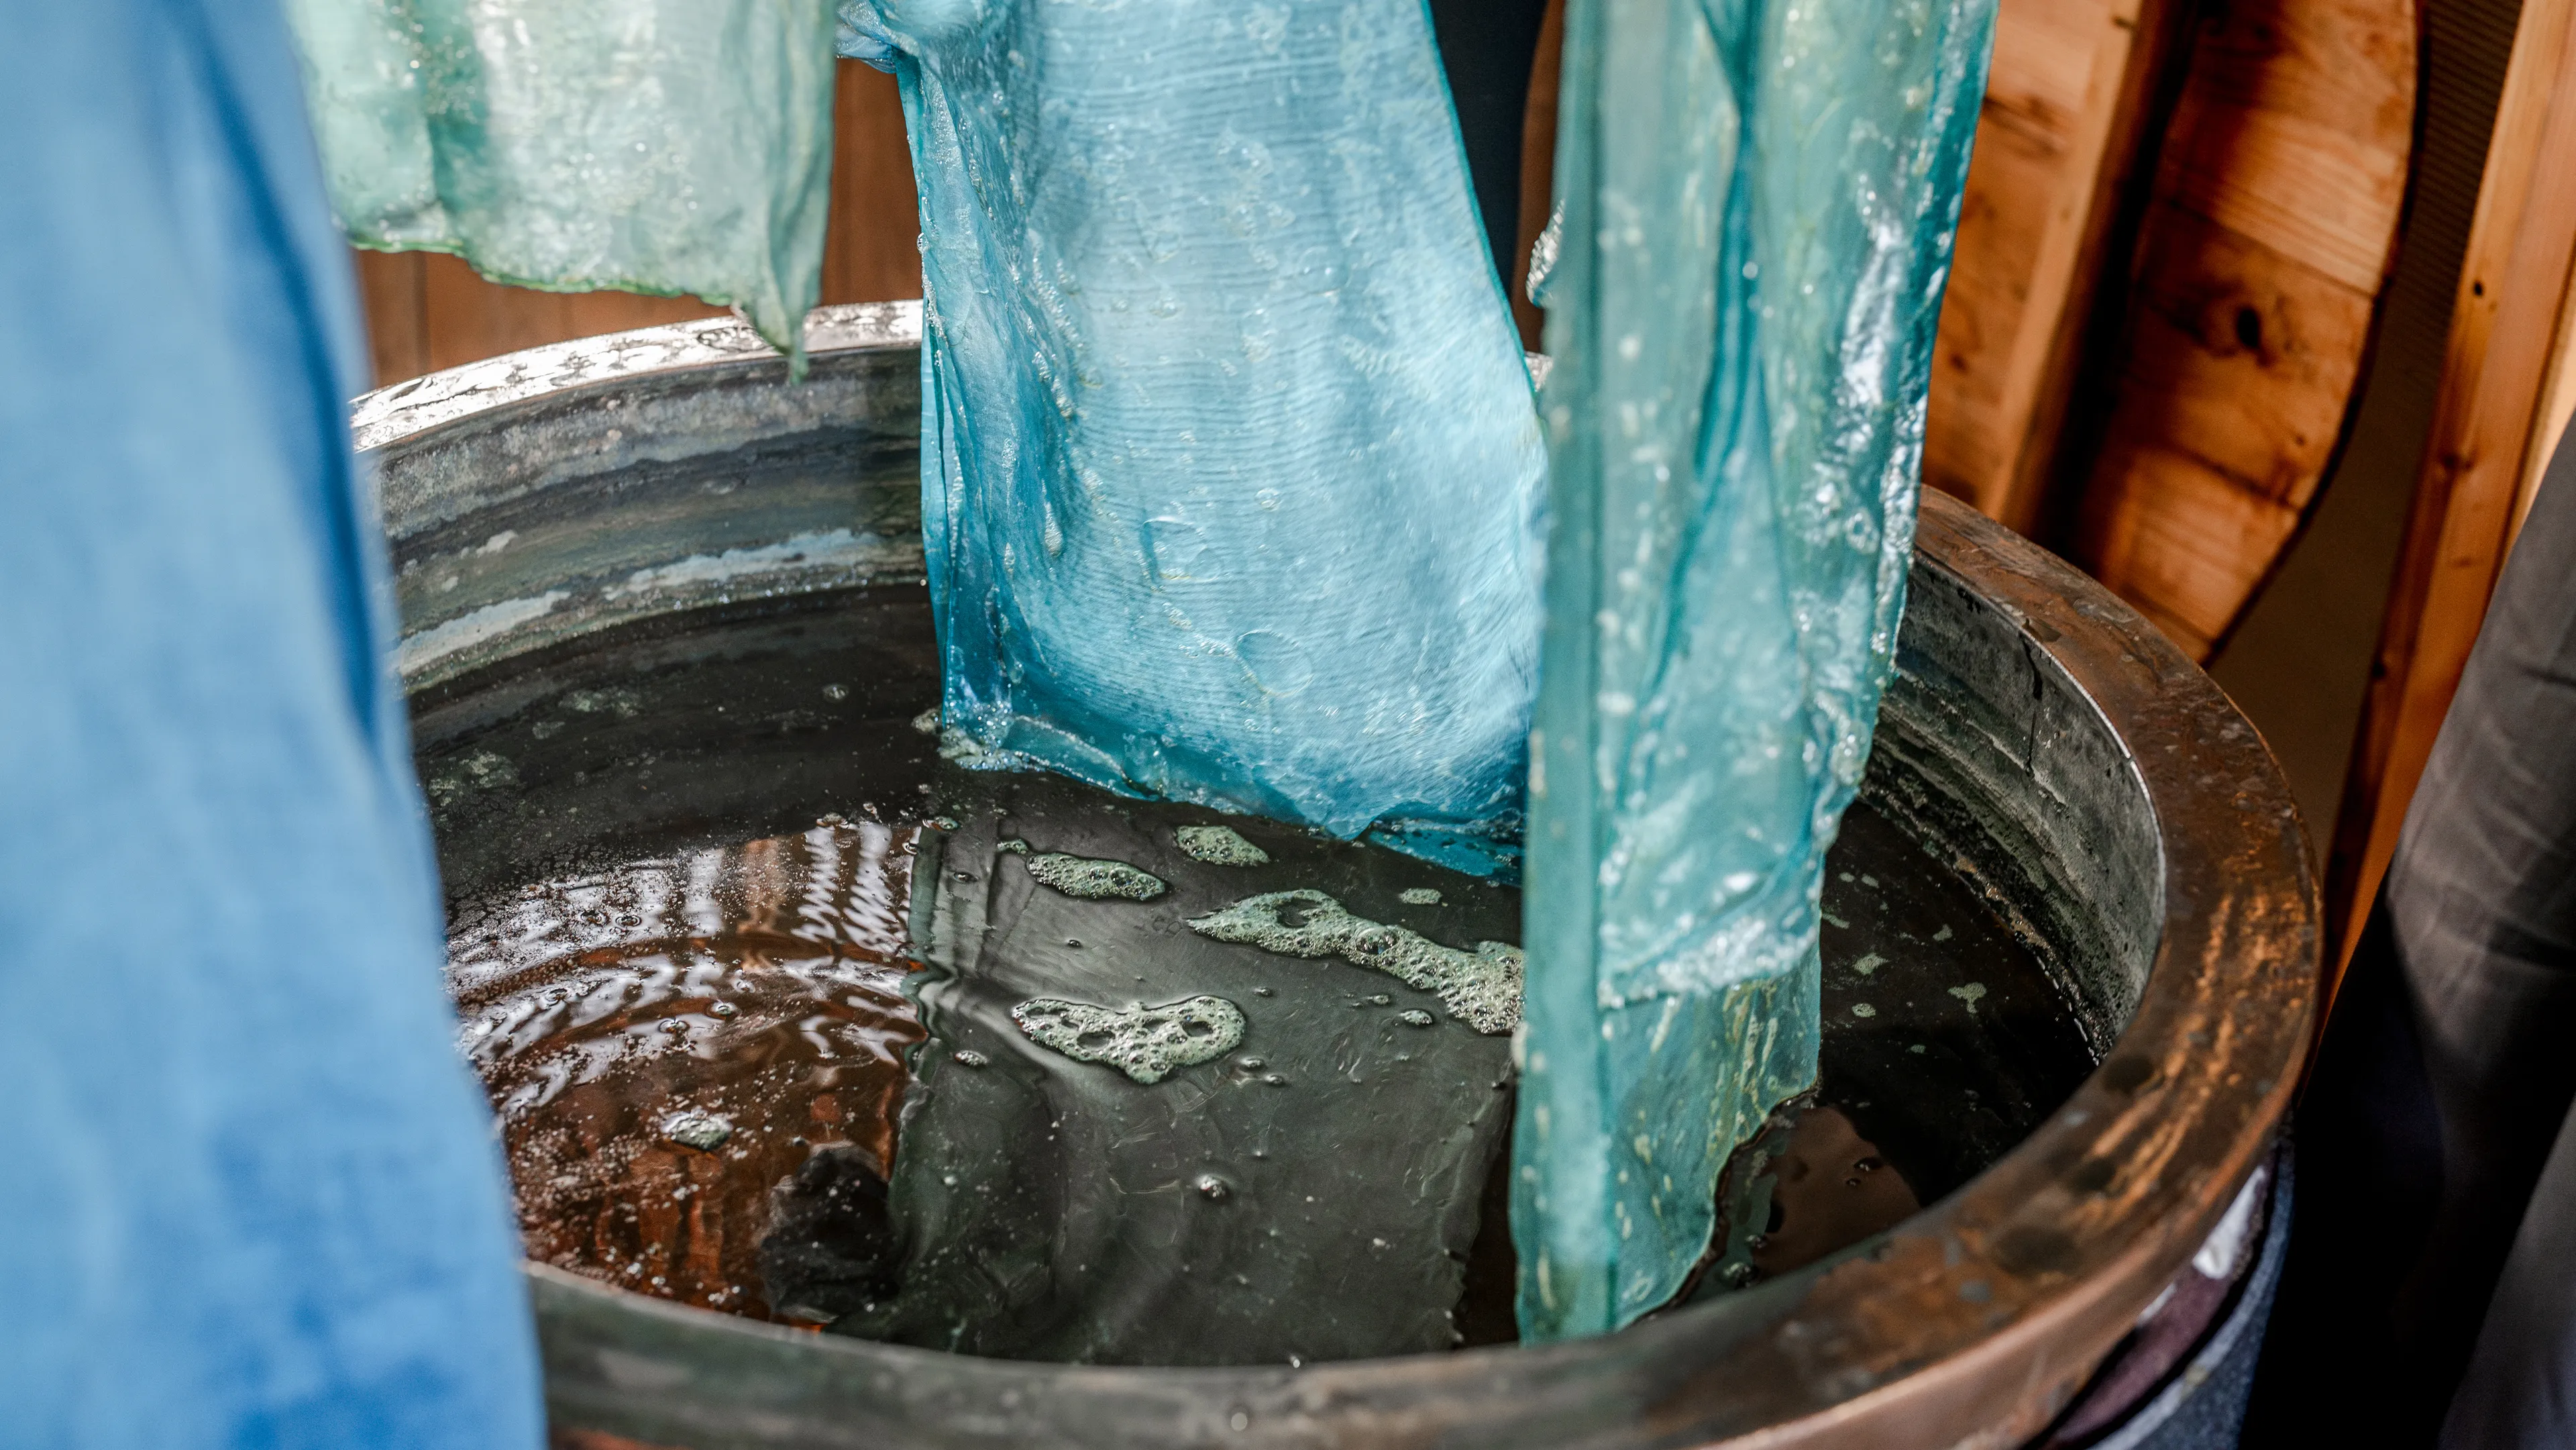 Indigo Dyeing and Fermented Tea at an Old Folk Home in a 1300-year-old Tokaido Post Town